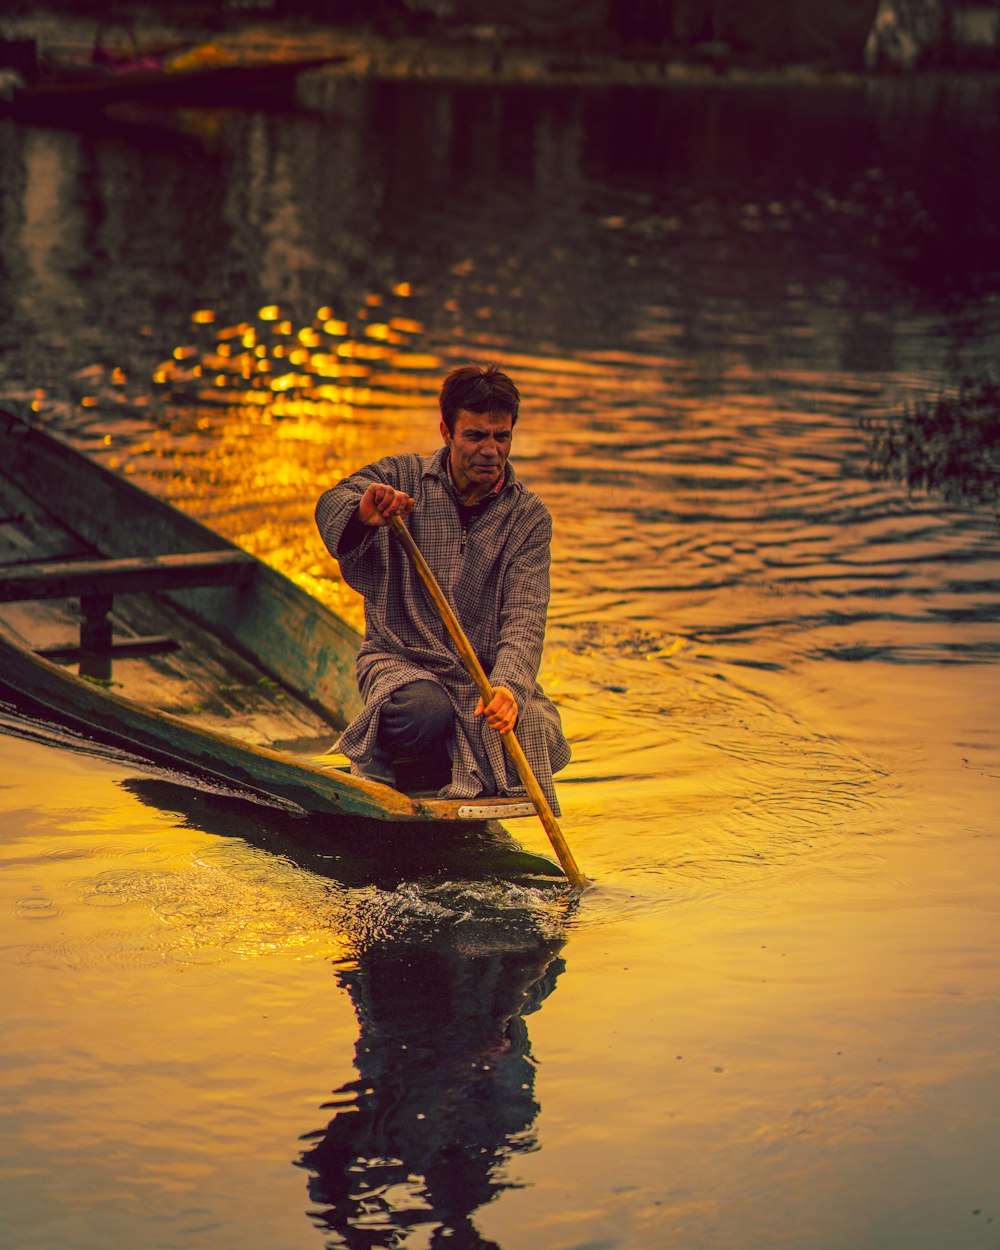 man in yellow and black jacket riding on boat during sunset